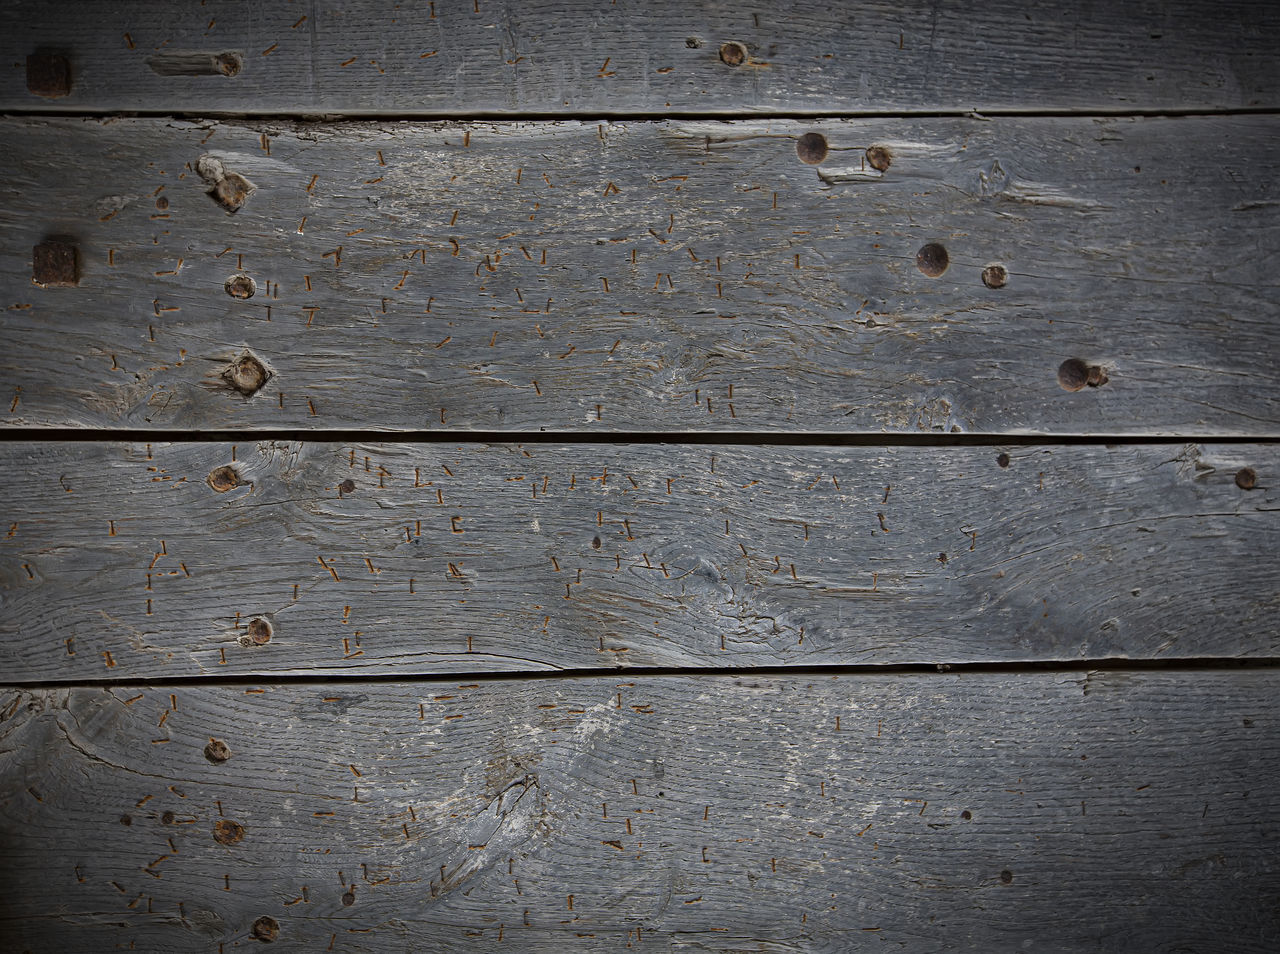 wood, backgrounds, textured, pattern, full frame, old, weathered, plank, no people, rough, floor, close-up, wood grain, wall, wall - building feature, flooring, abstract, dirt, architecture, dark, damaged, rundown, gray, built structure, in a row, brown, rustic, material, textured effect, striped, stained, surface level, timber, hardwood, metal, outdoors, line